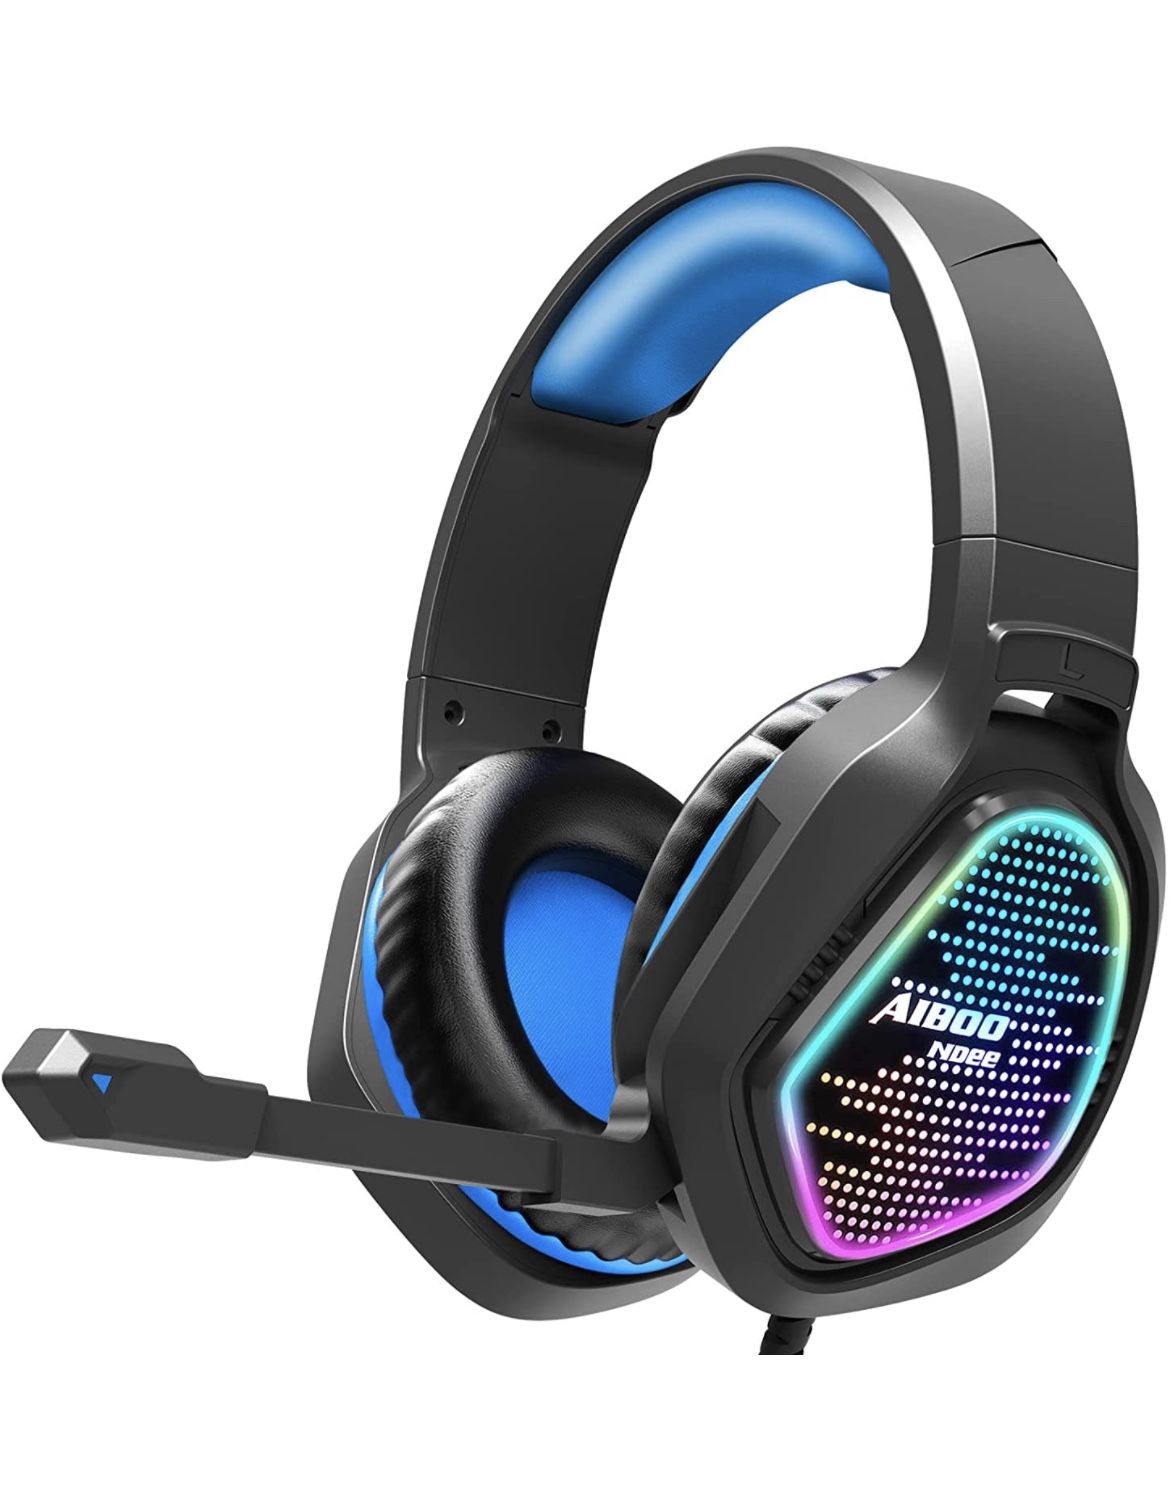 New Sealed Gaming Headset with Mic, PS4 Headset with Noise Canceling, Stereo Surround Sound, RGB Light, Comfort Earmuffs, Over-Ear Headphones 